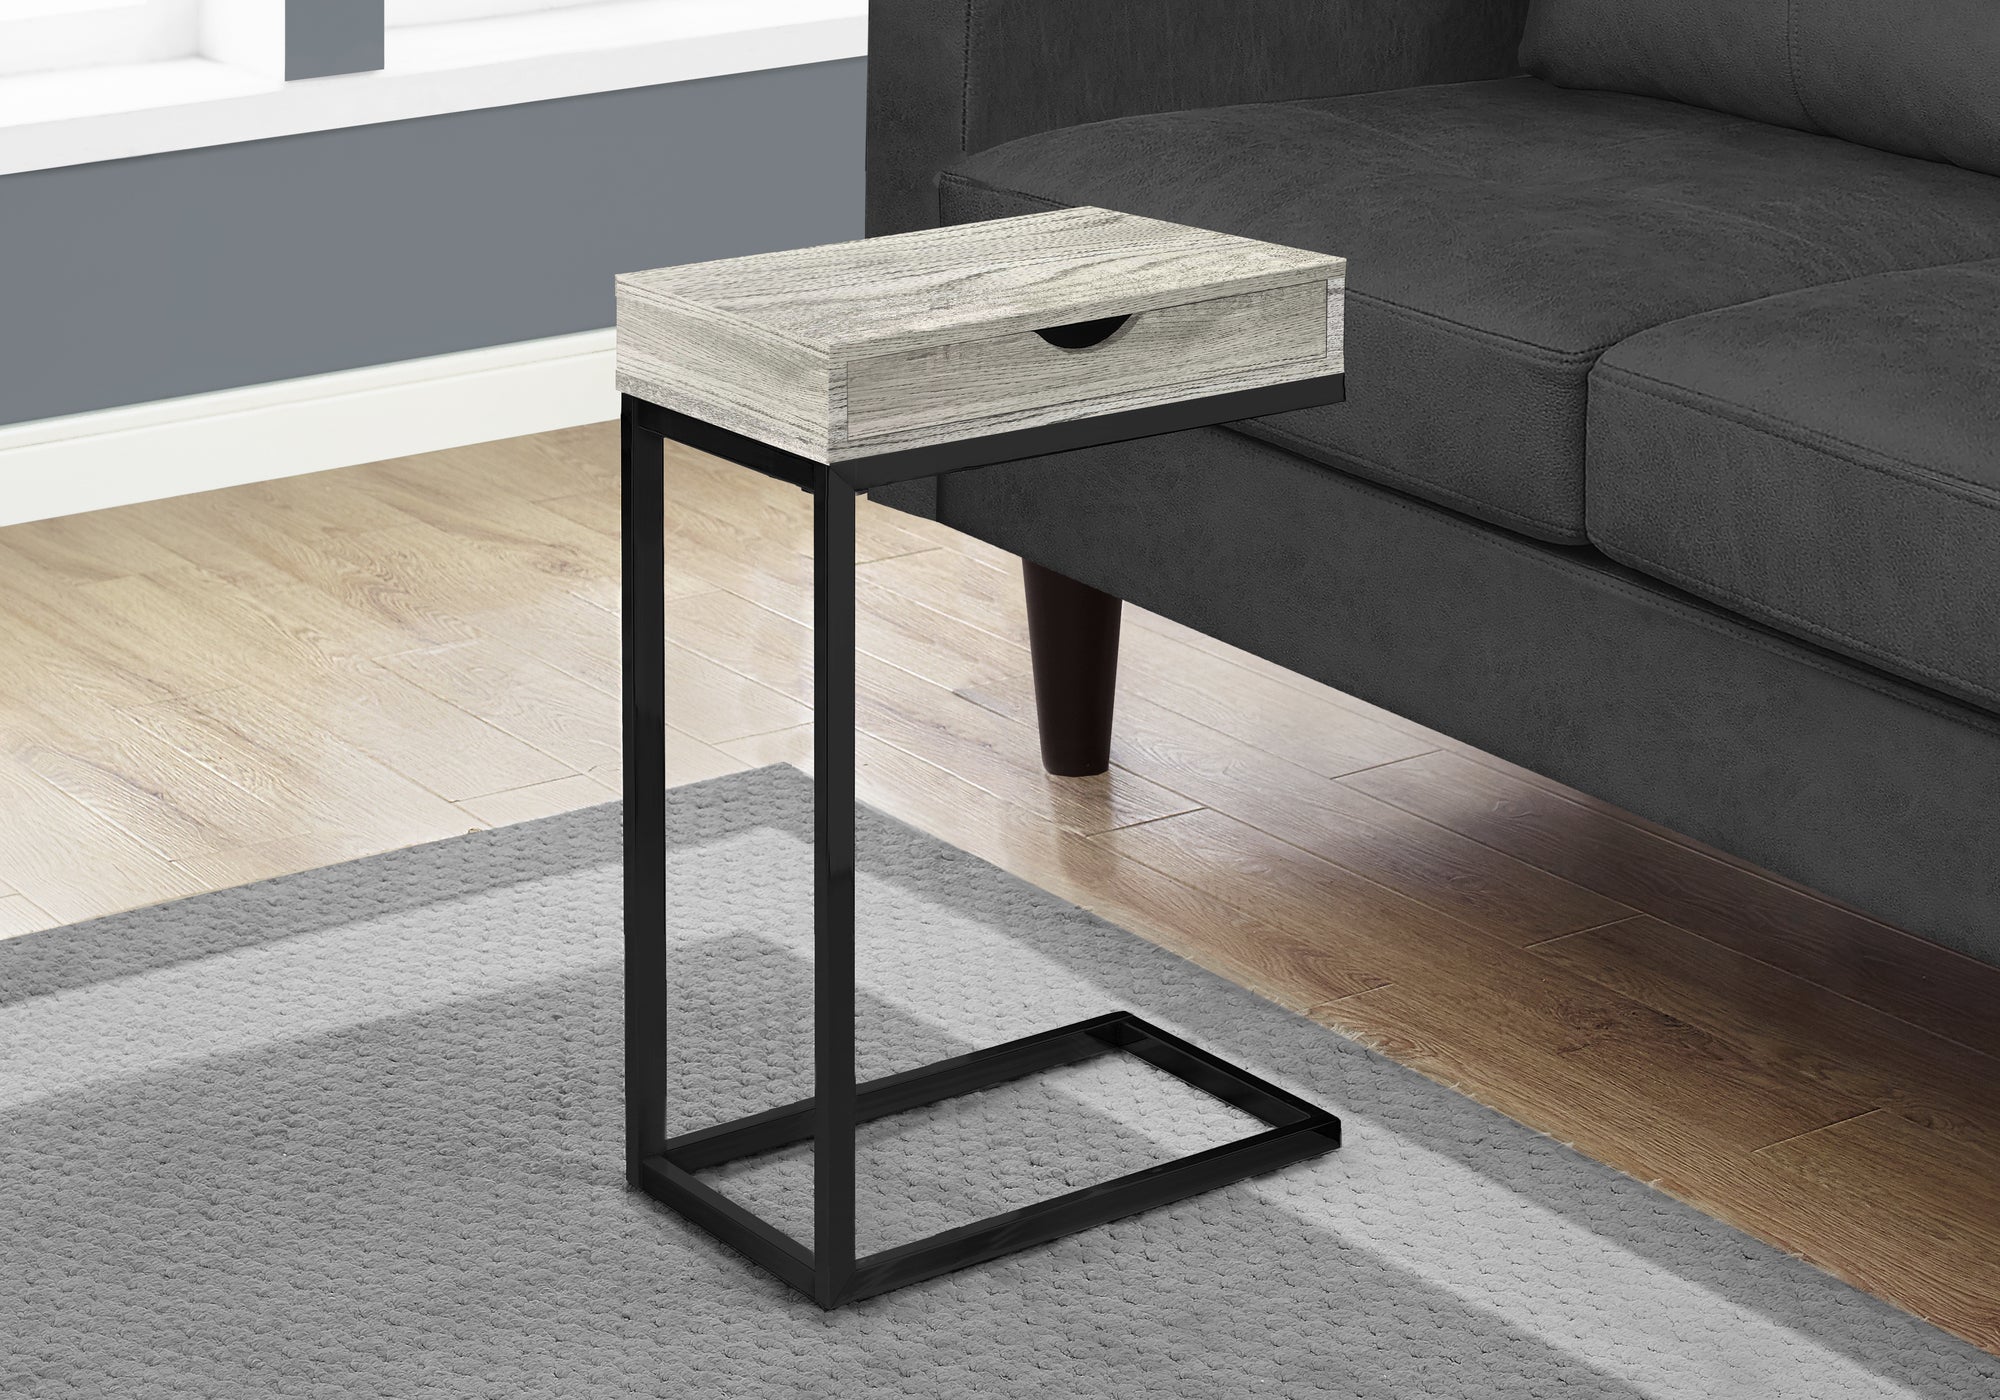 MN-503407    Accent Table, C-Shaped, End, Side, Snack, Living Room, Bedroom, Storage Drawer, Metal Legs, Laminate, Grey Reclaimed Wood Look, Black, Contemporary, Modern